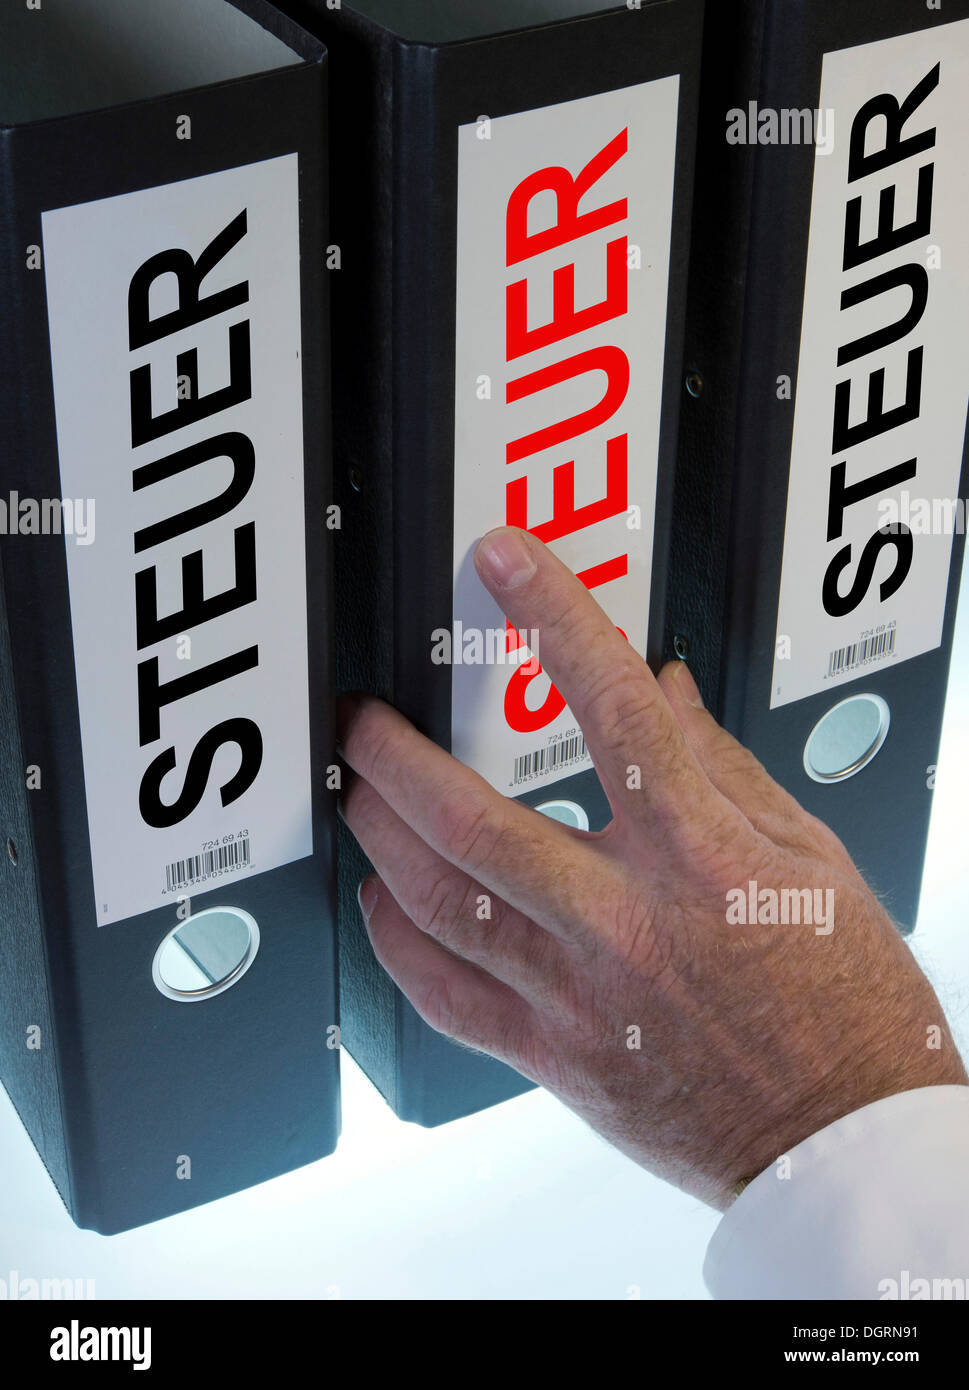 Hand reaching for file folders labeled 'Steuer', German for 'tax' Stock Photo